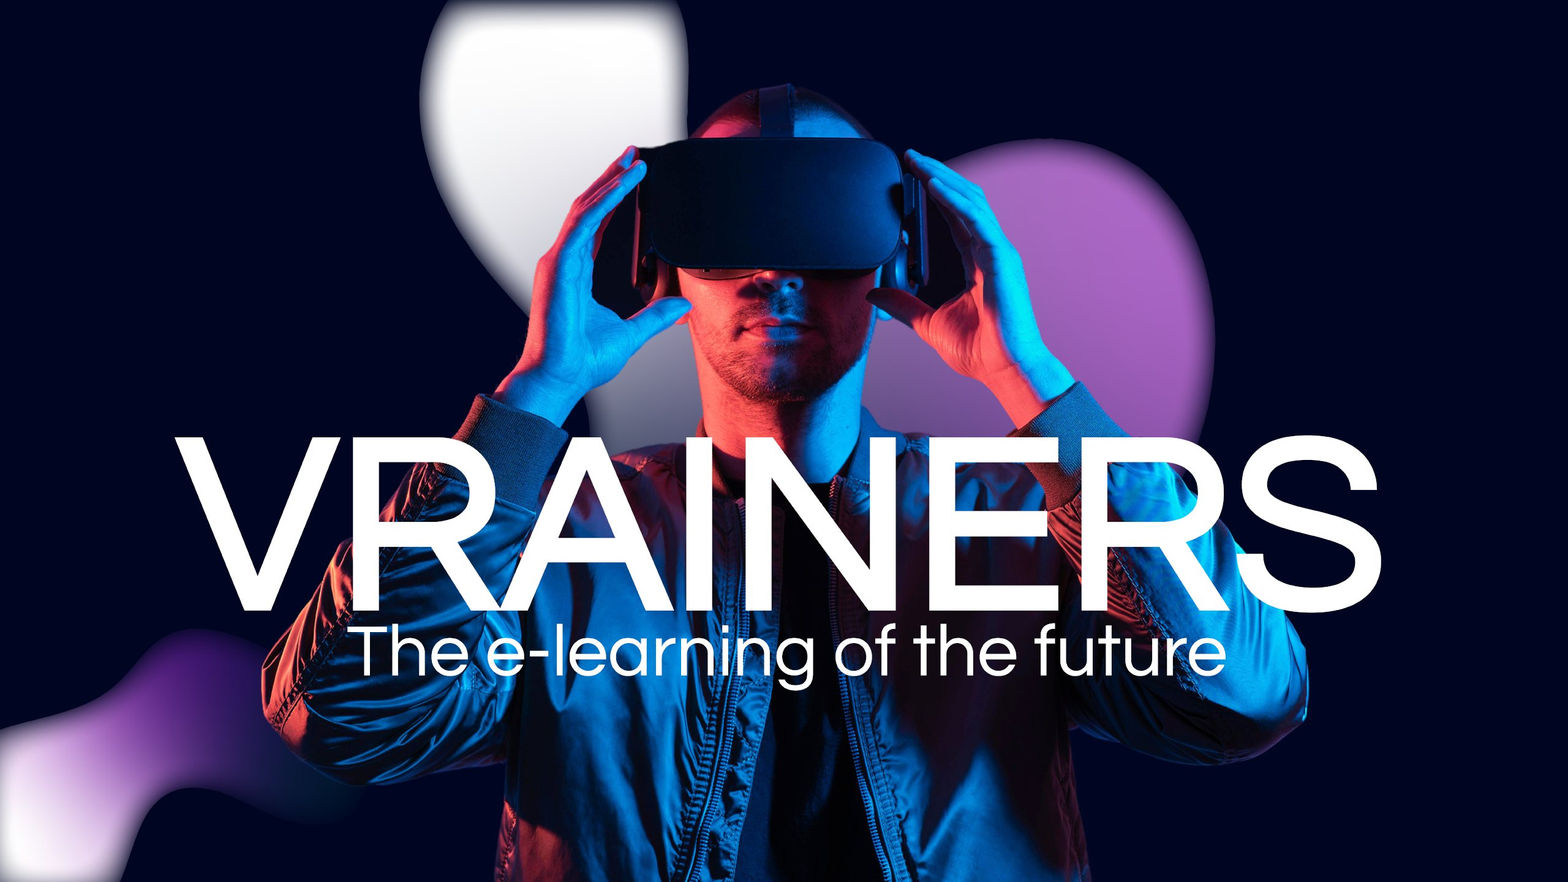 Vrainers. The E-Learning of the Future